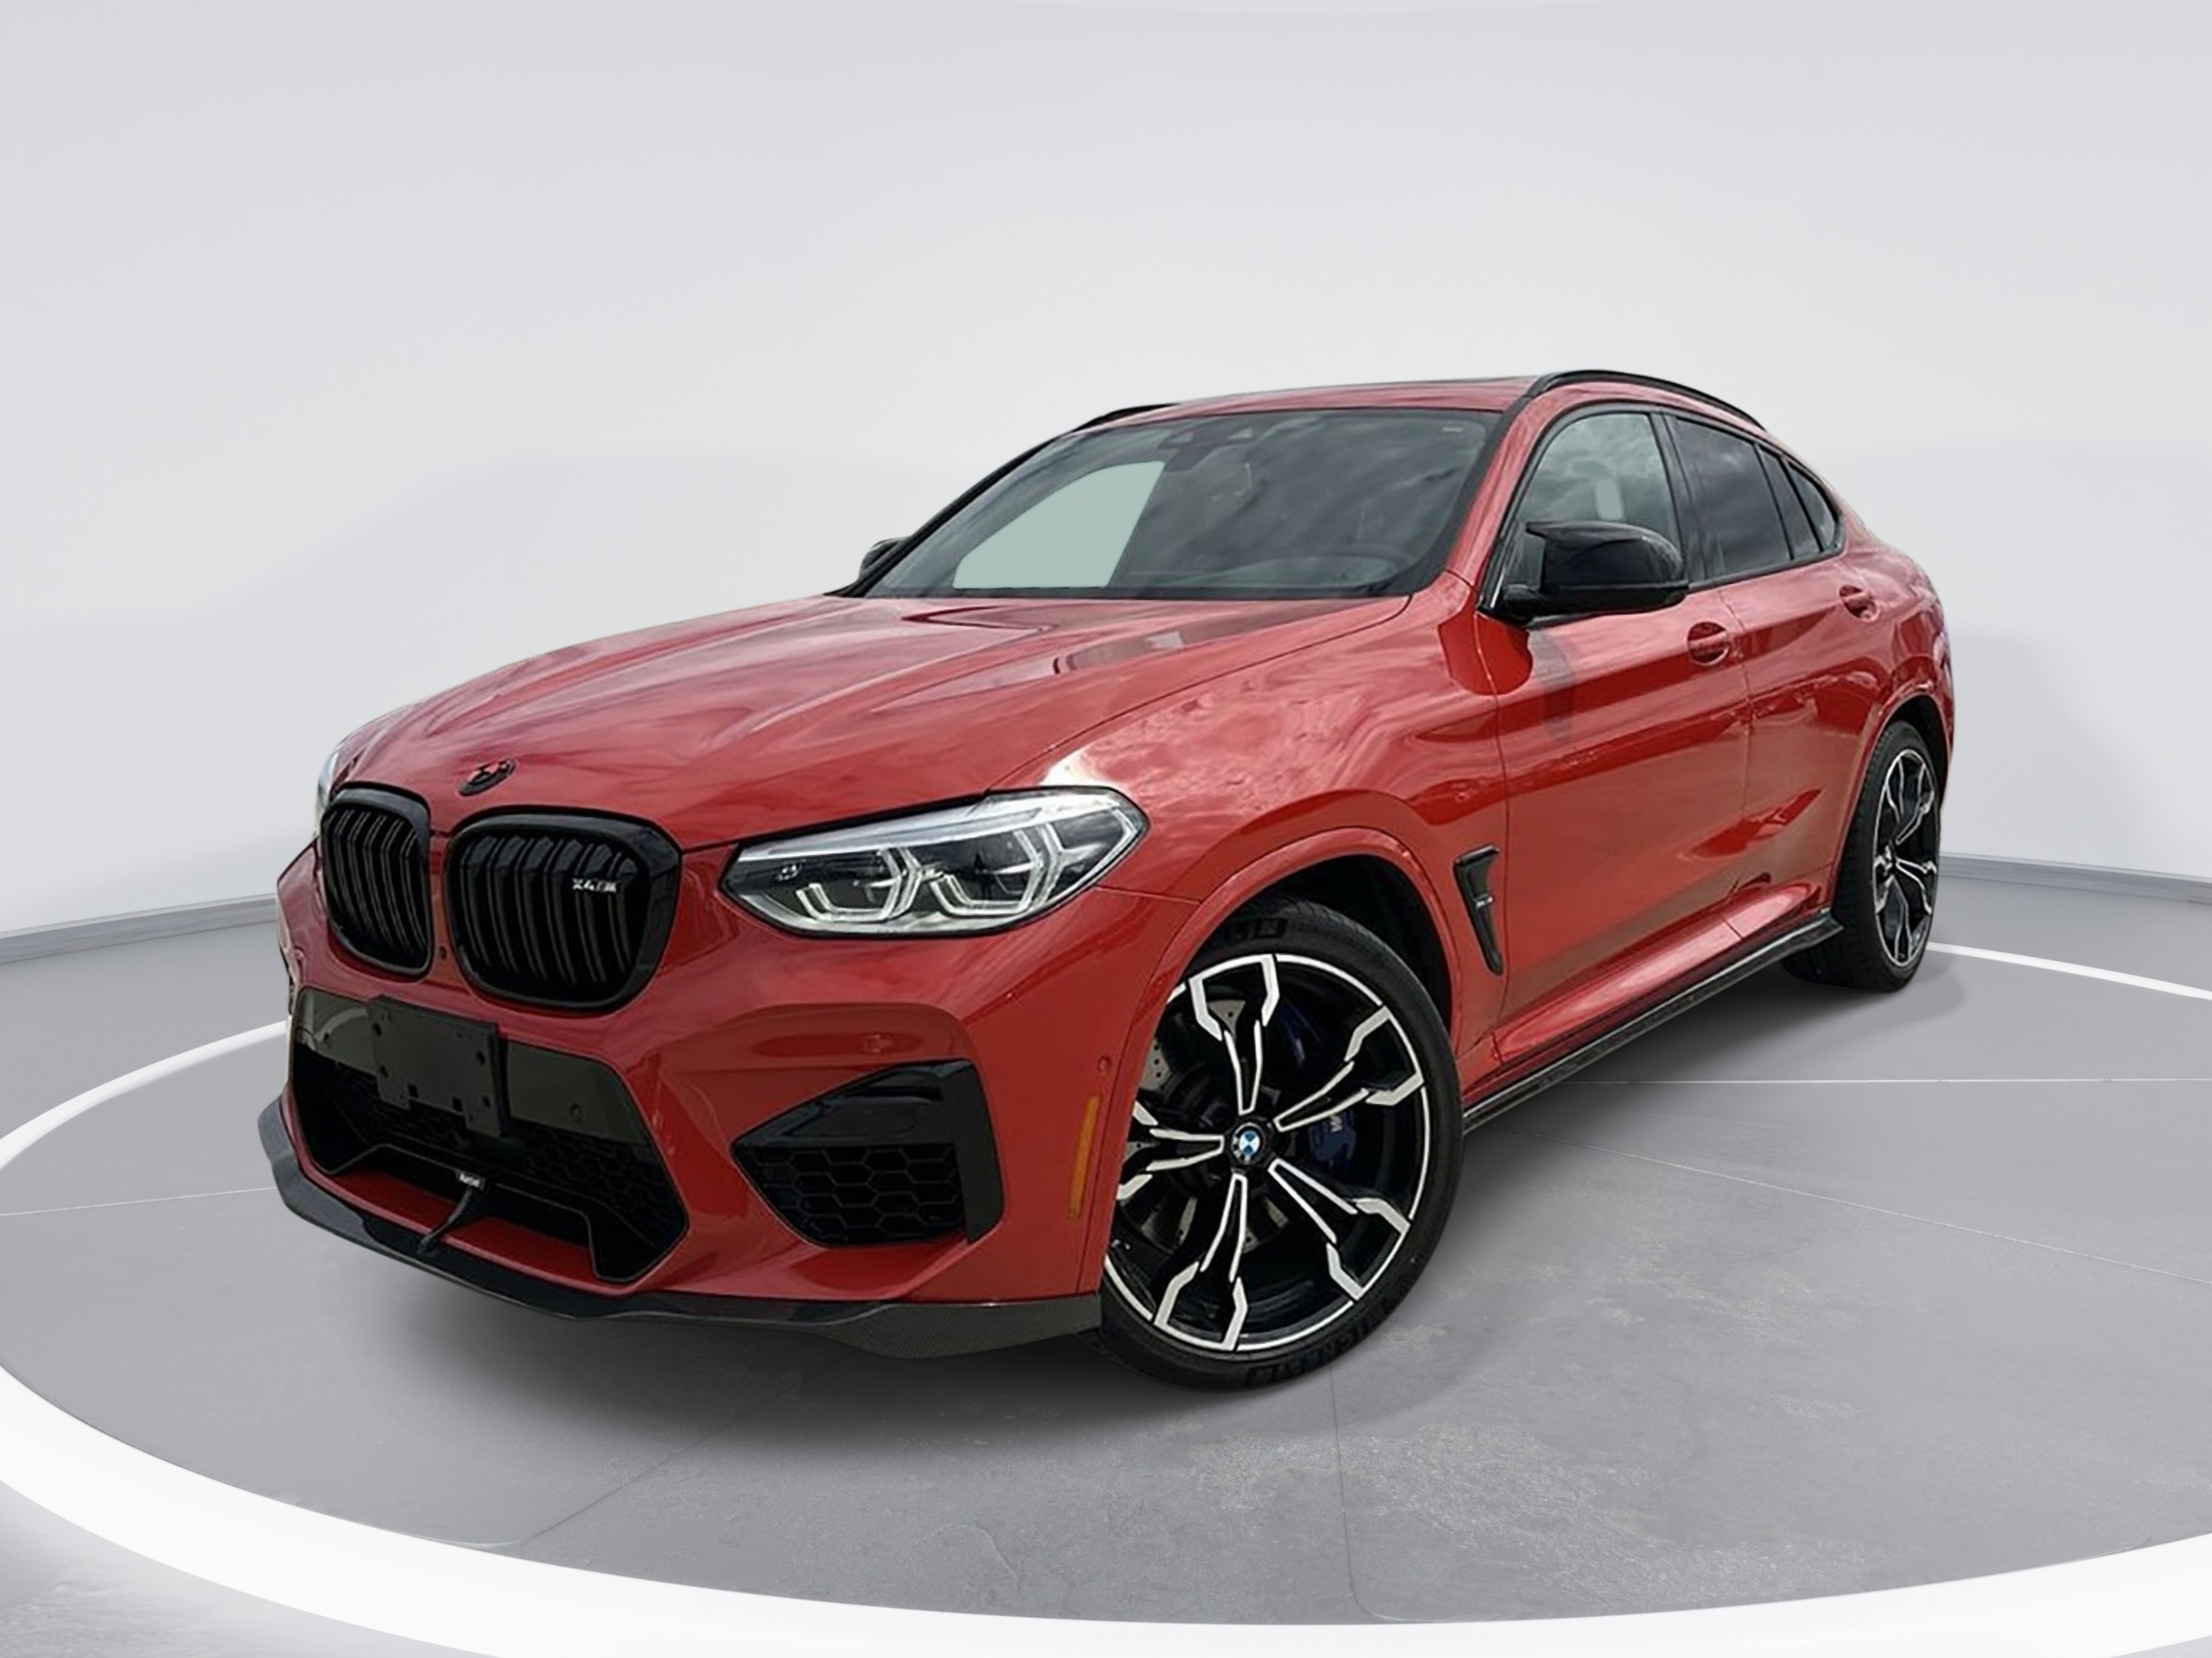 2020 BMW X4 M Competition | All tires and brakes new